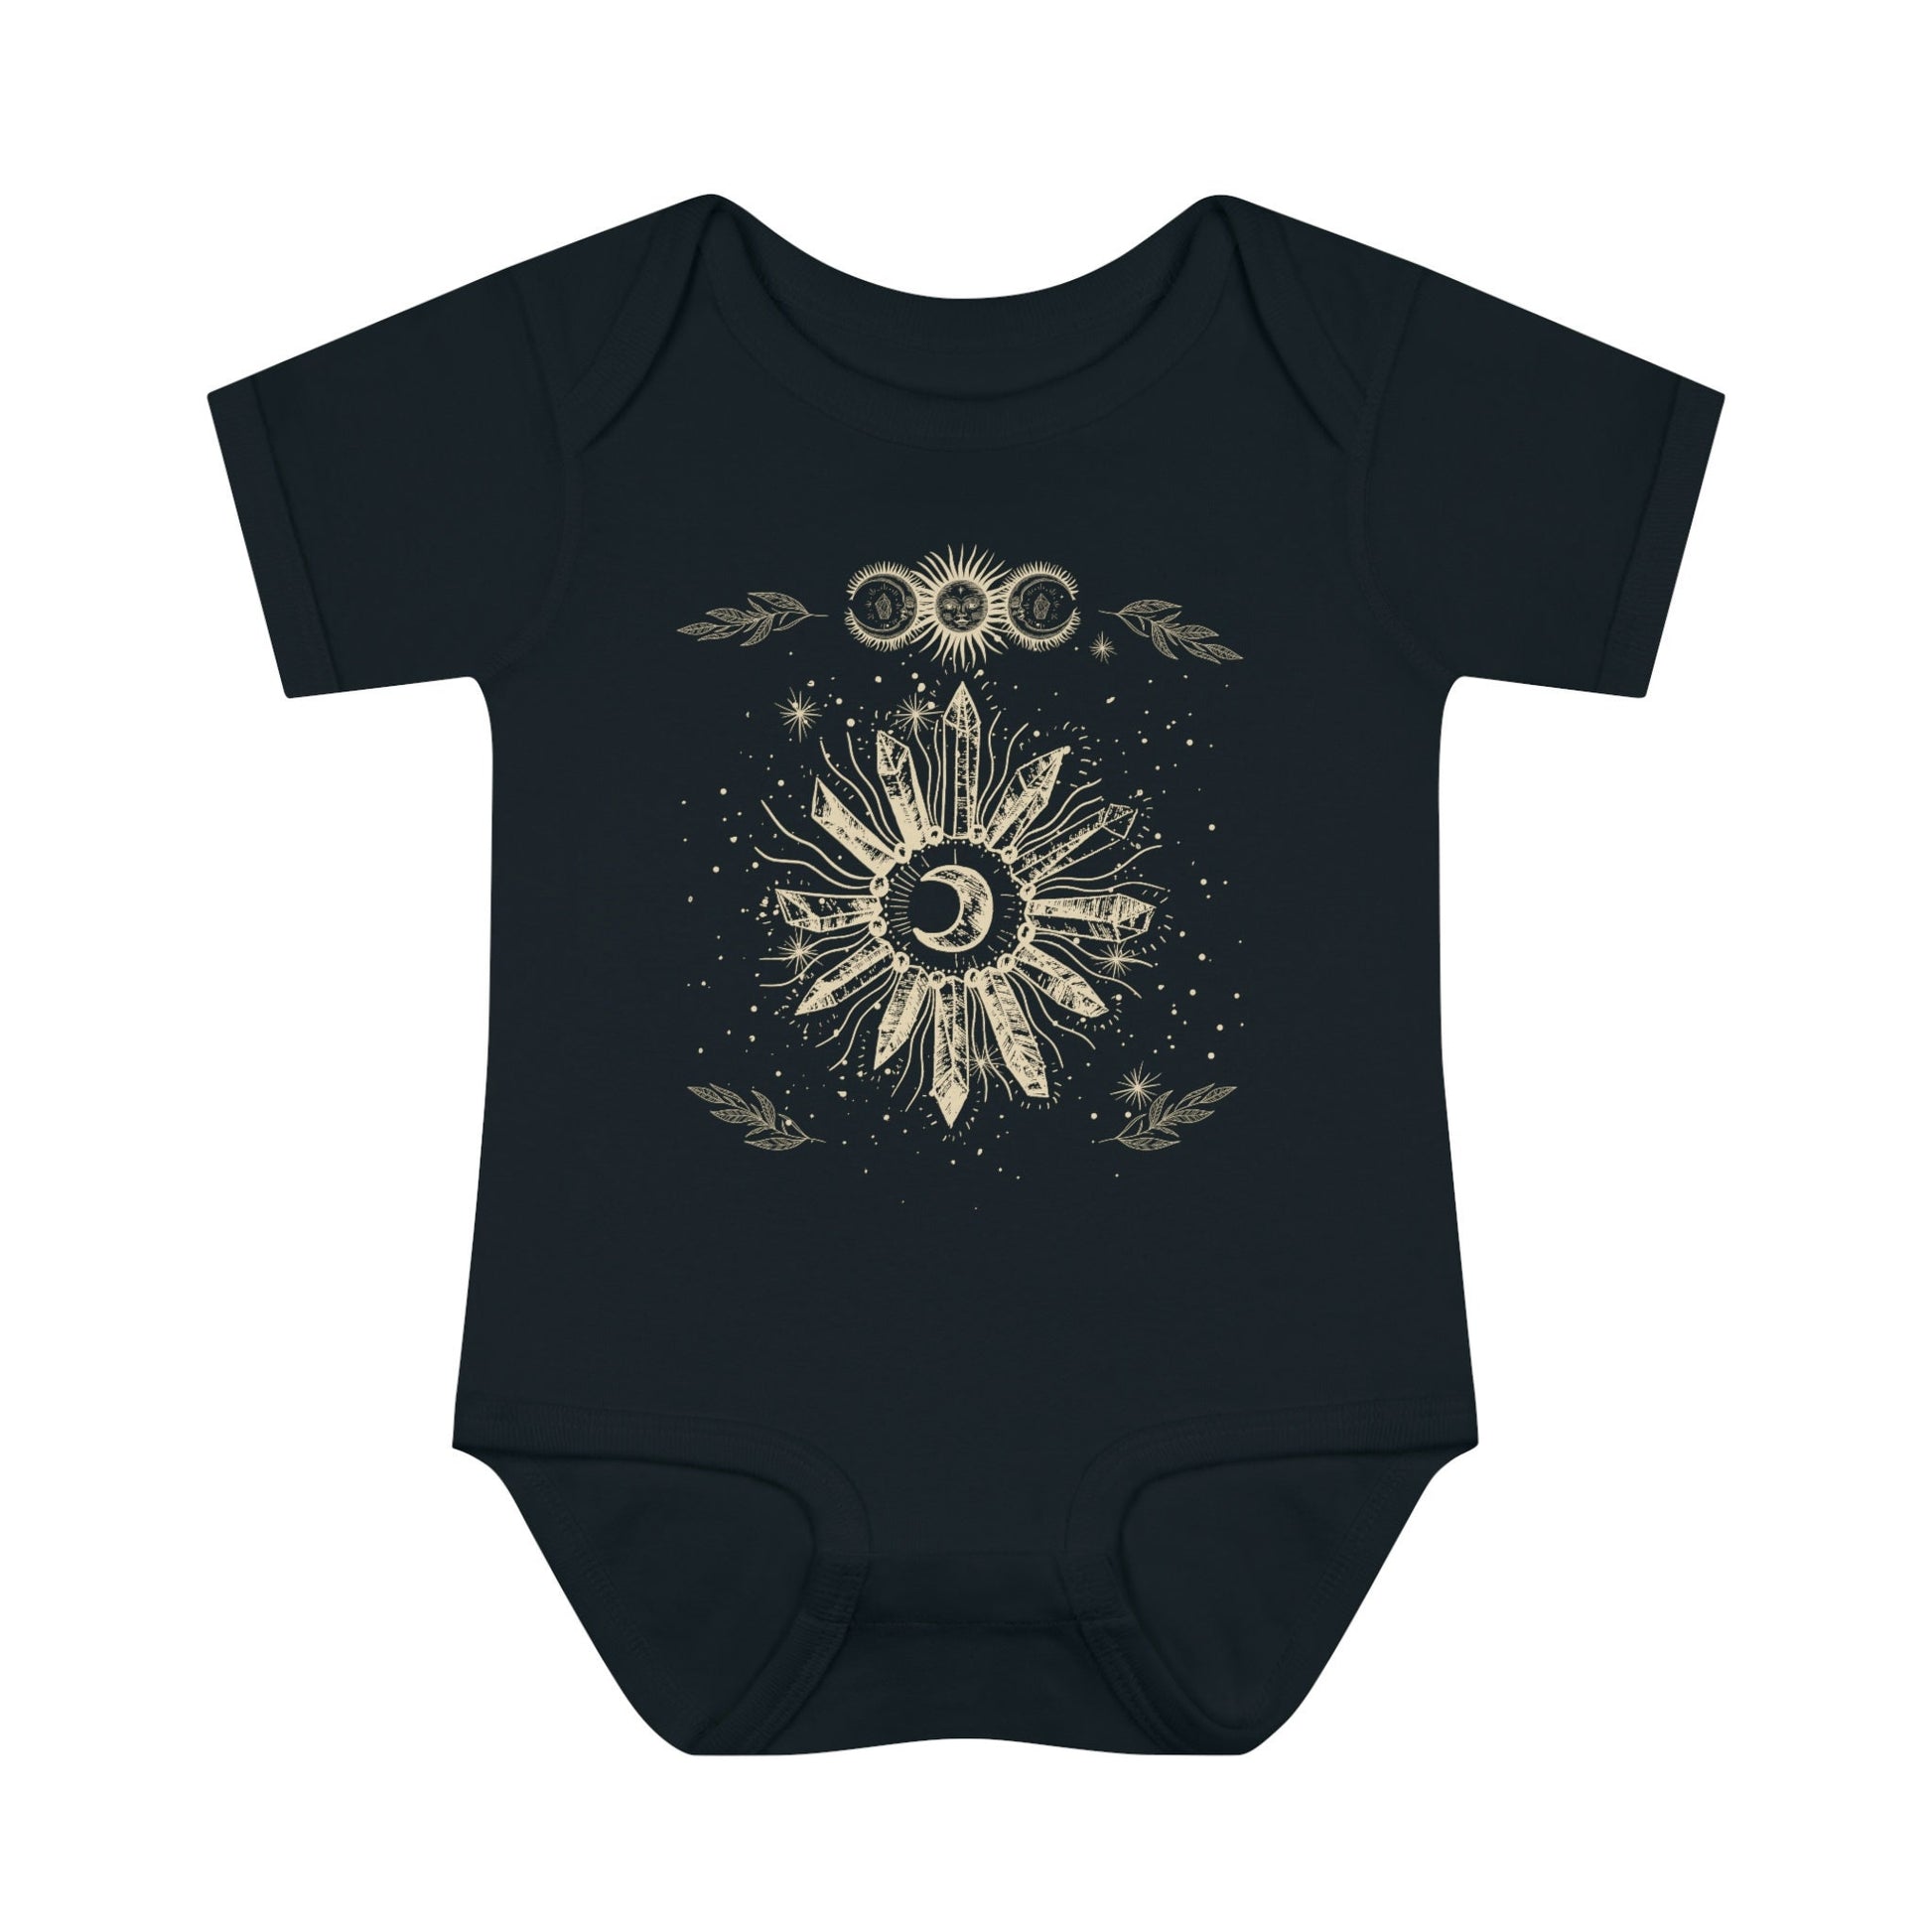 Sun and Moon Baby Bodysuit Boho Baby Bodysuit Mystical Baby Witchy Baby Clothes Goth Baby Clothes Alt Baby Shirt Hippie Crystal Bodysuit